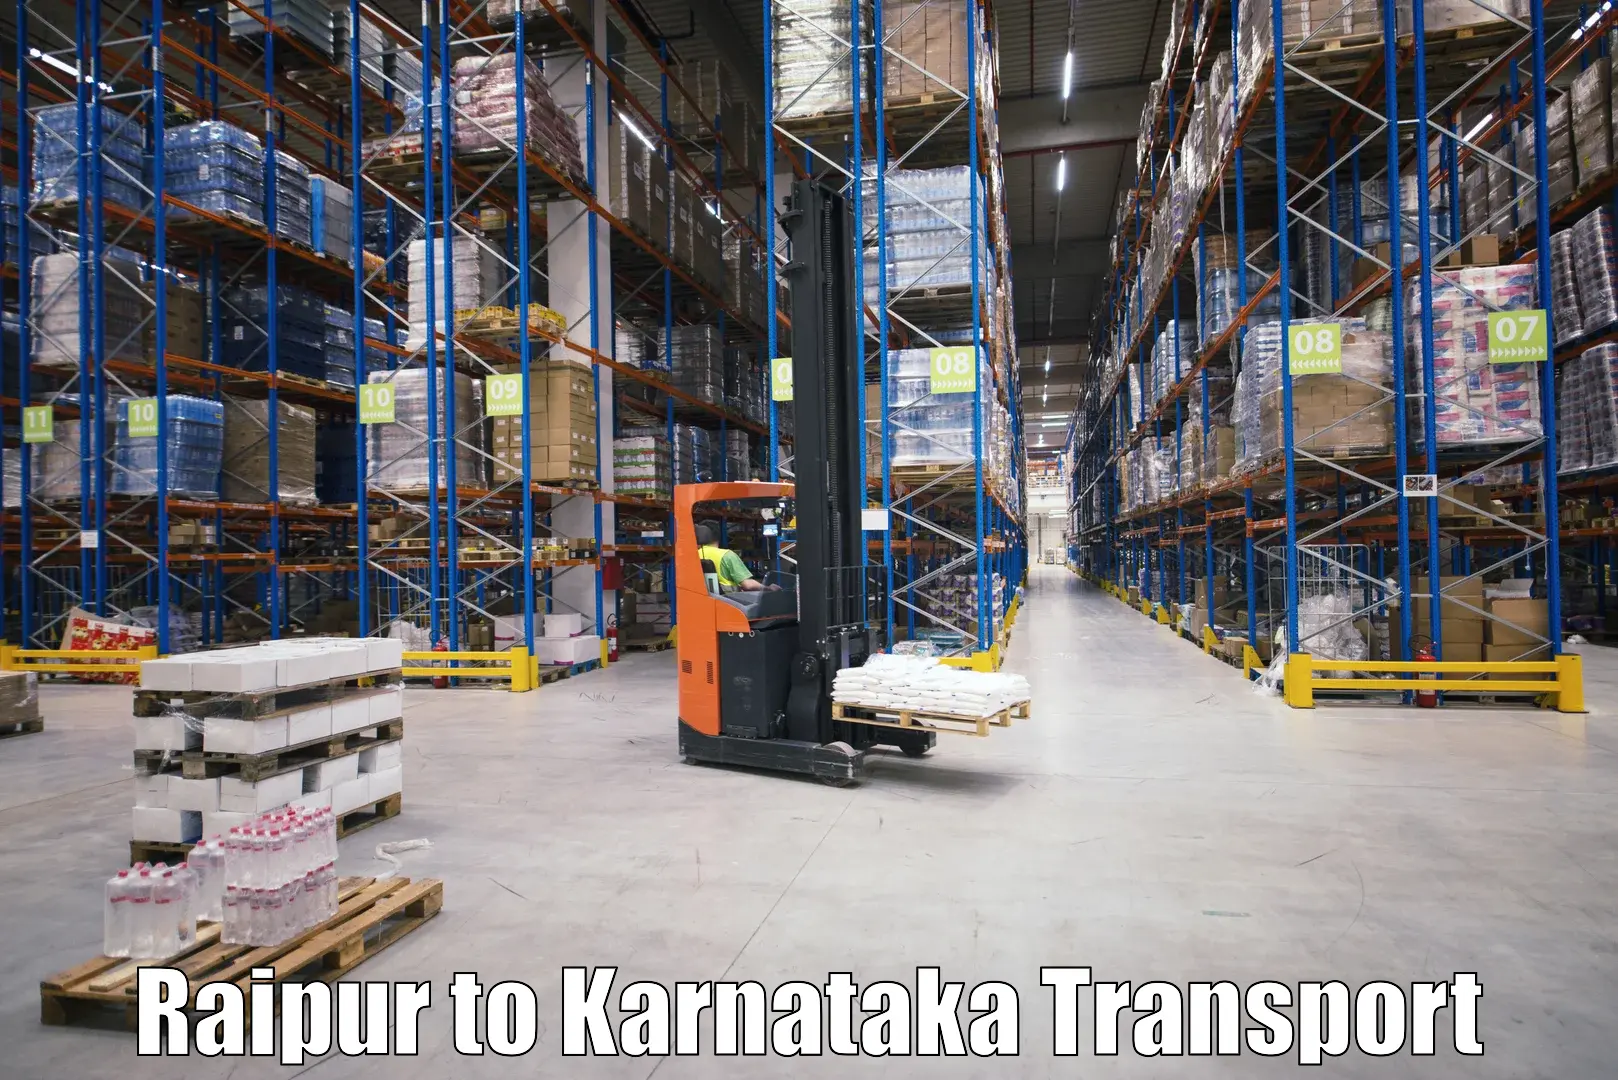 Commercial transport service Raipur to Bangalore